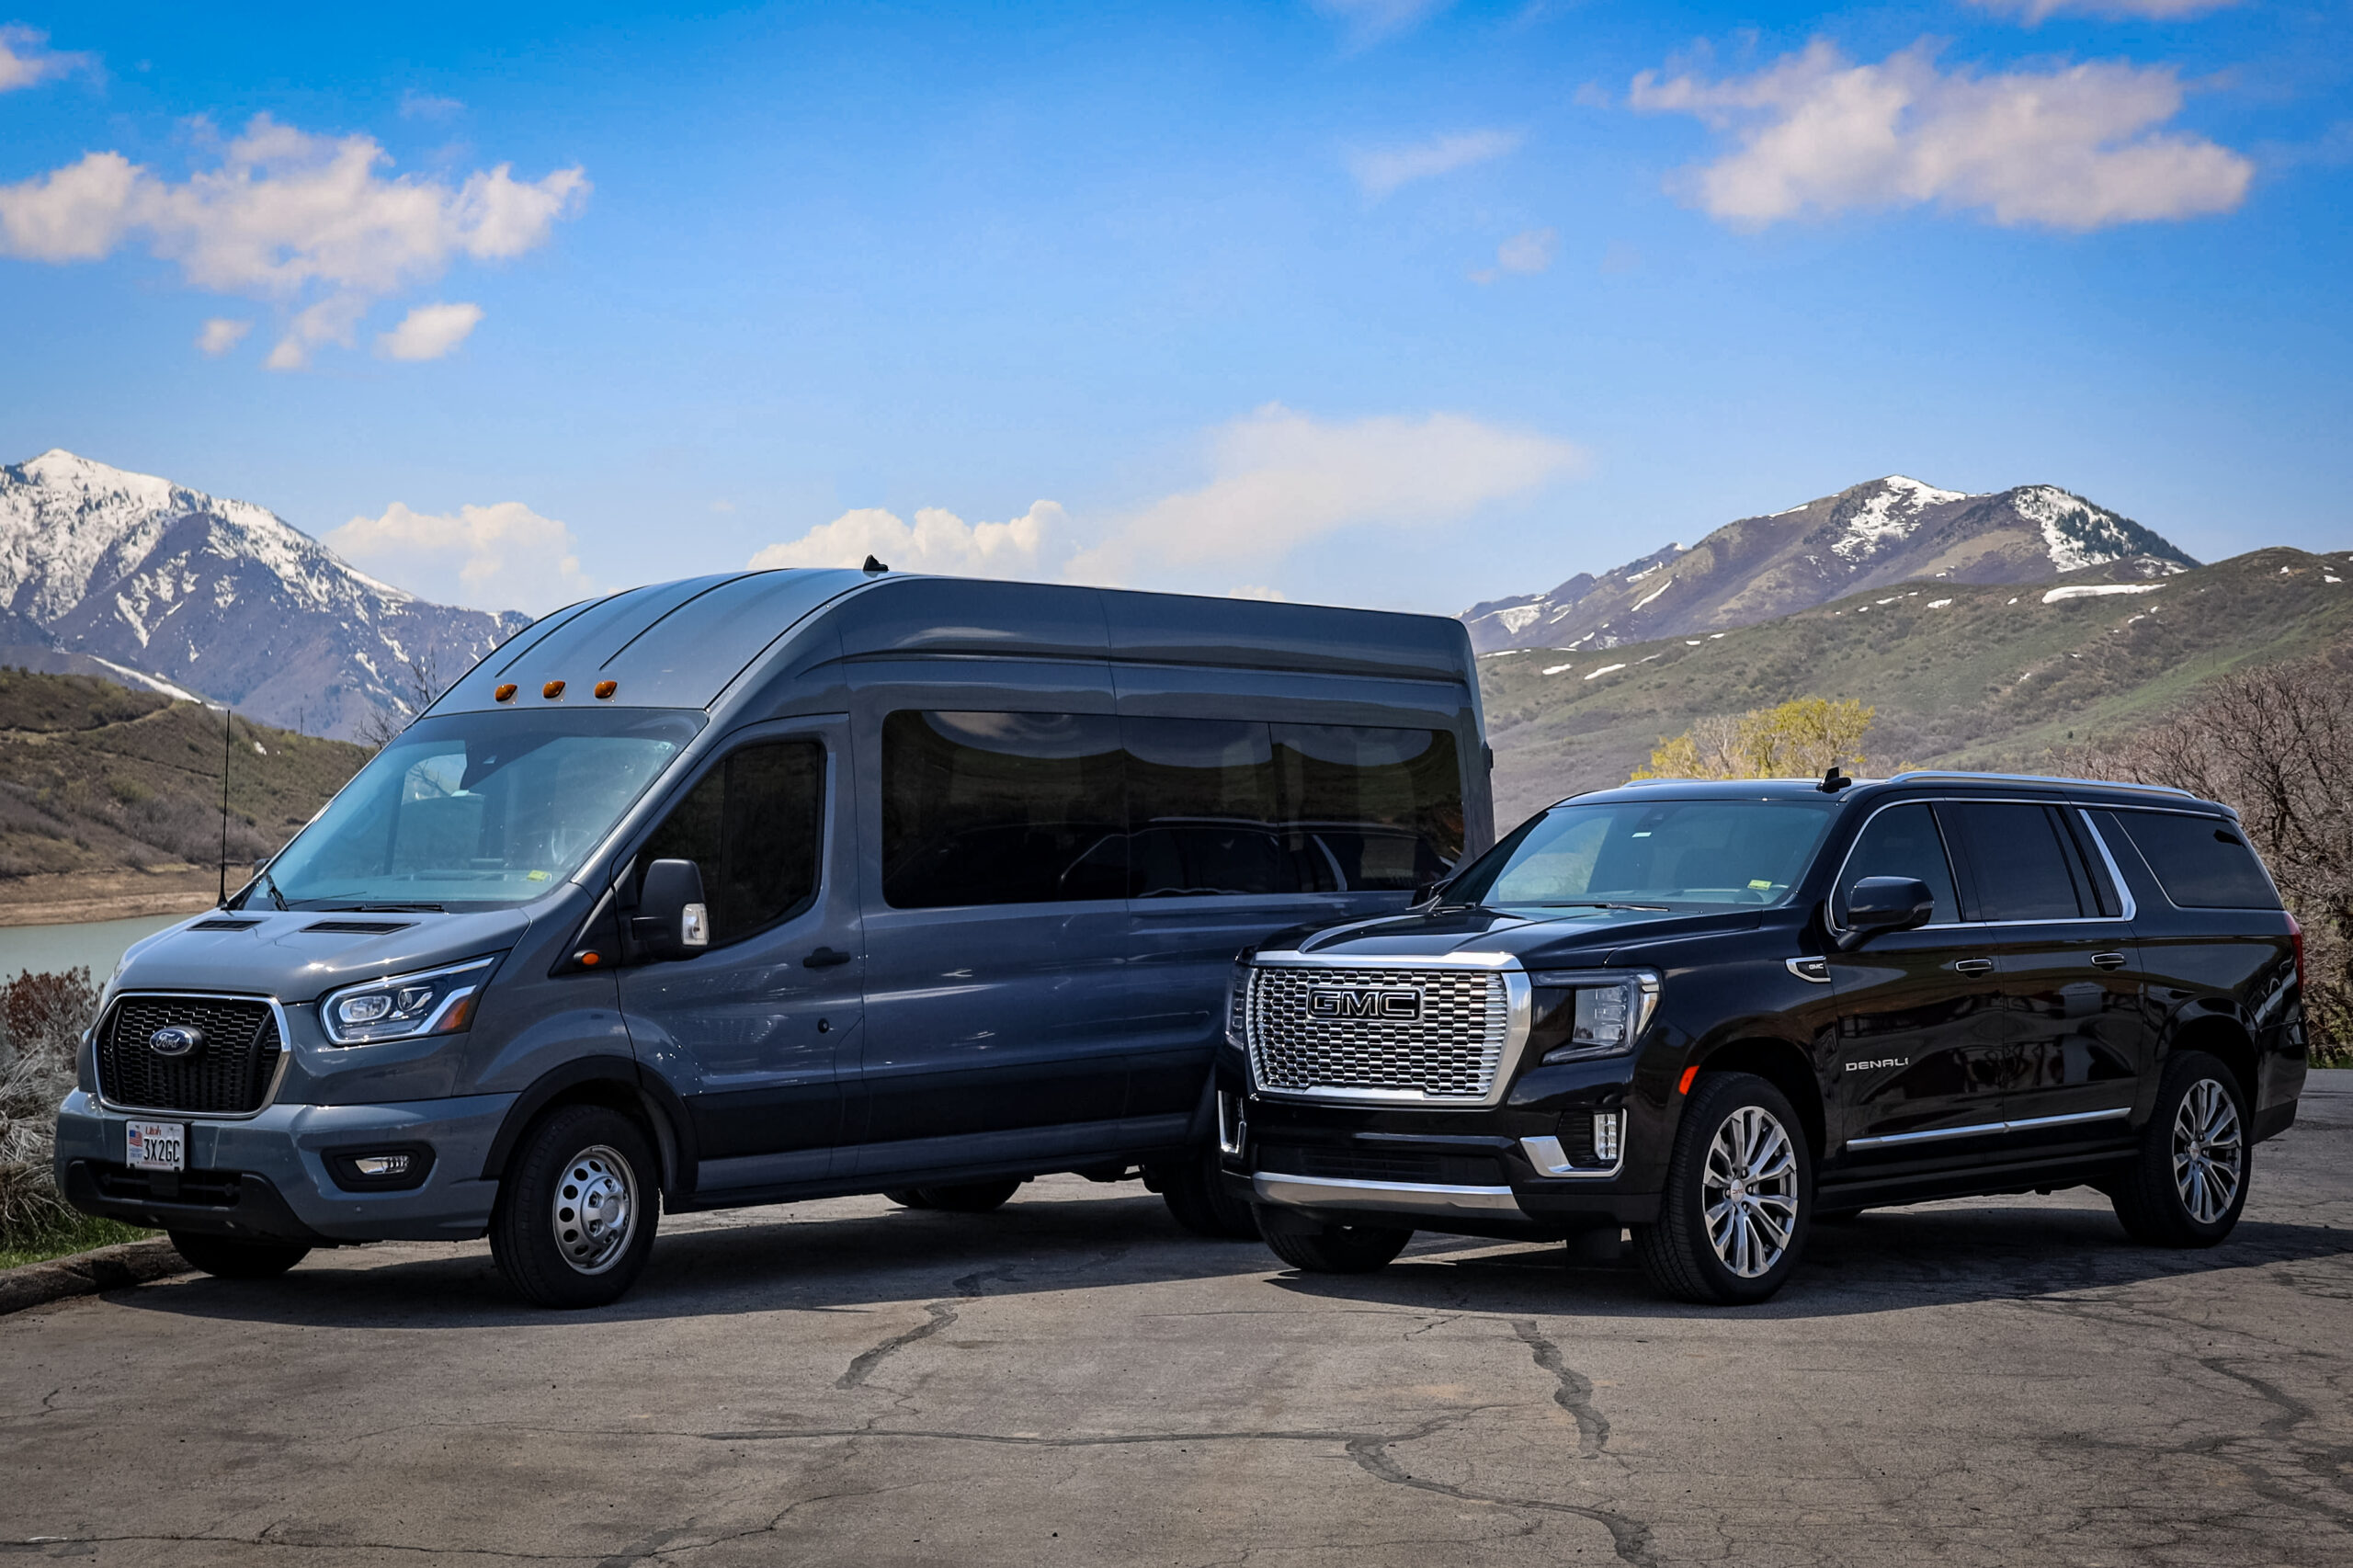 Utah Transportation Network- Utah airport and resort transportation for corporate groups and private luxury travellers 